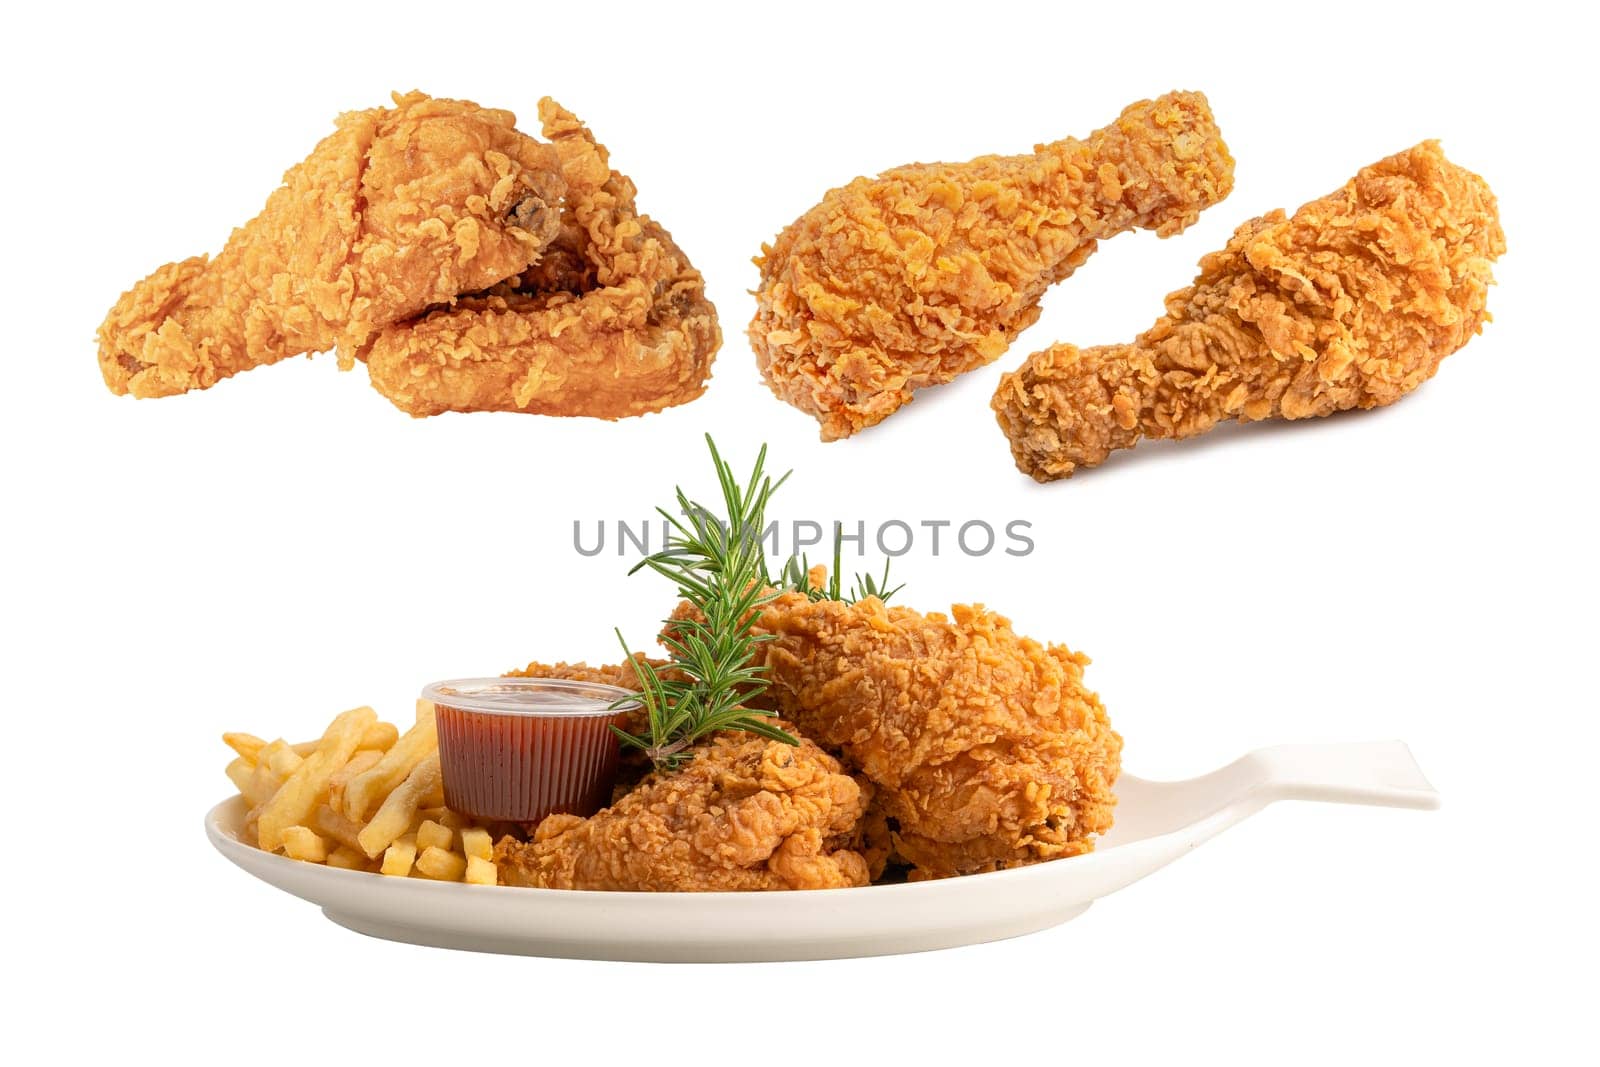 Fried chicken isolated on white background, junk food snack concept.